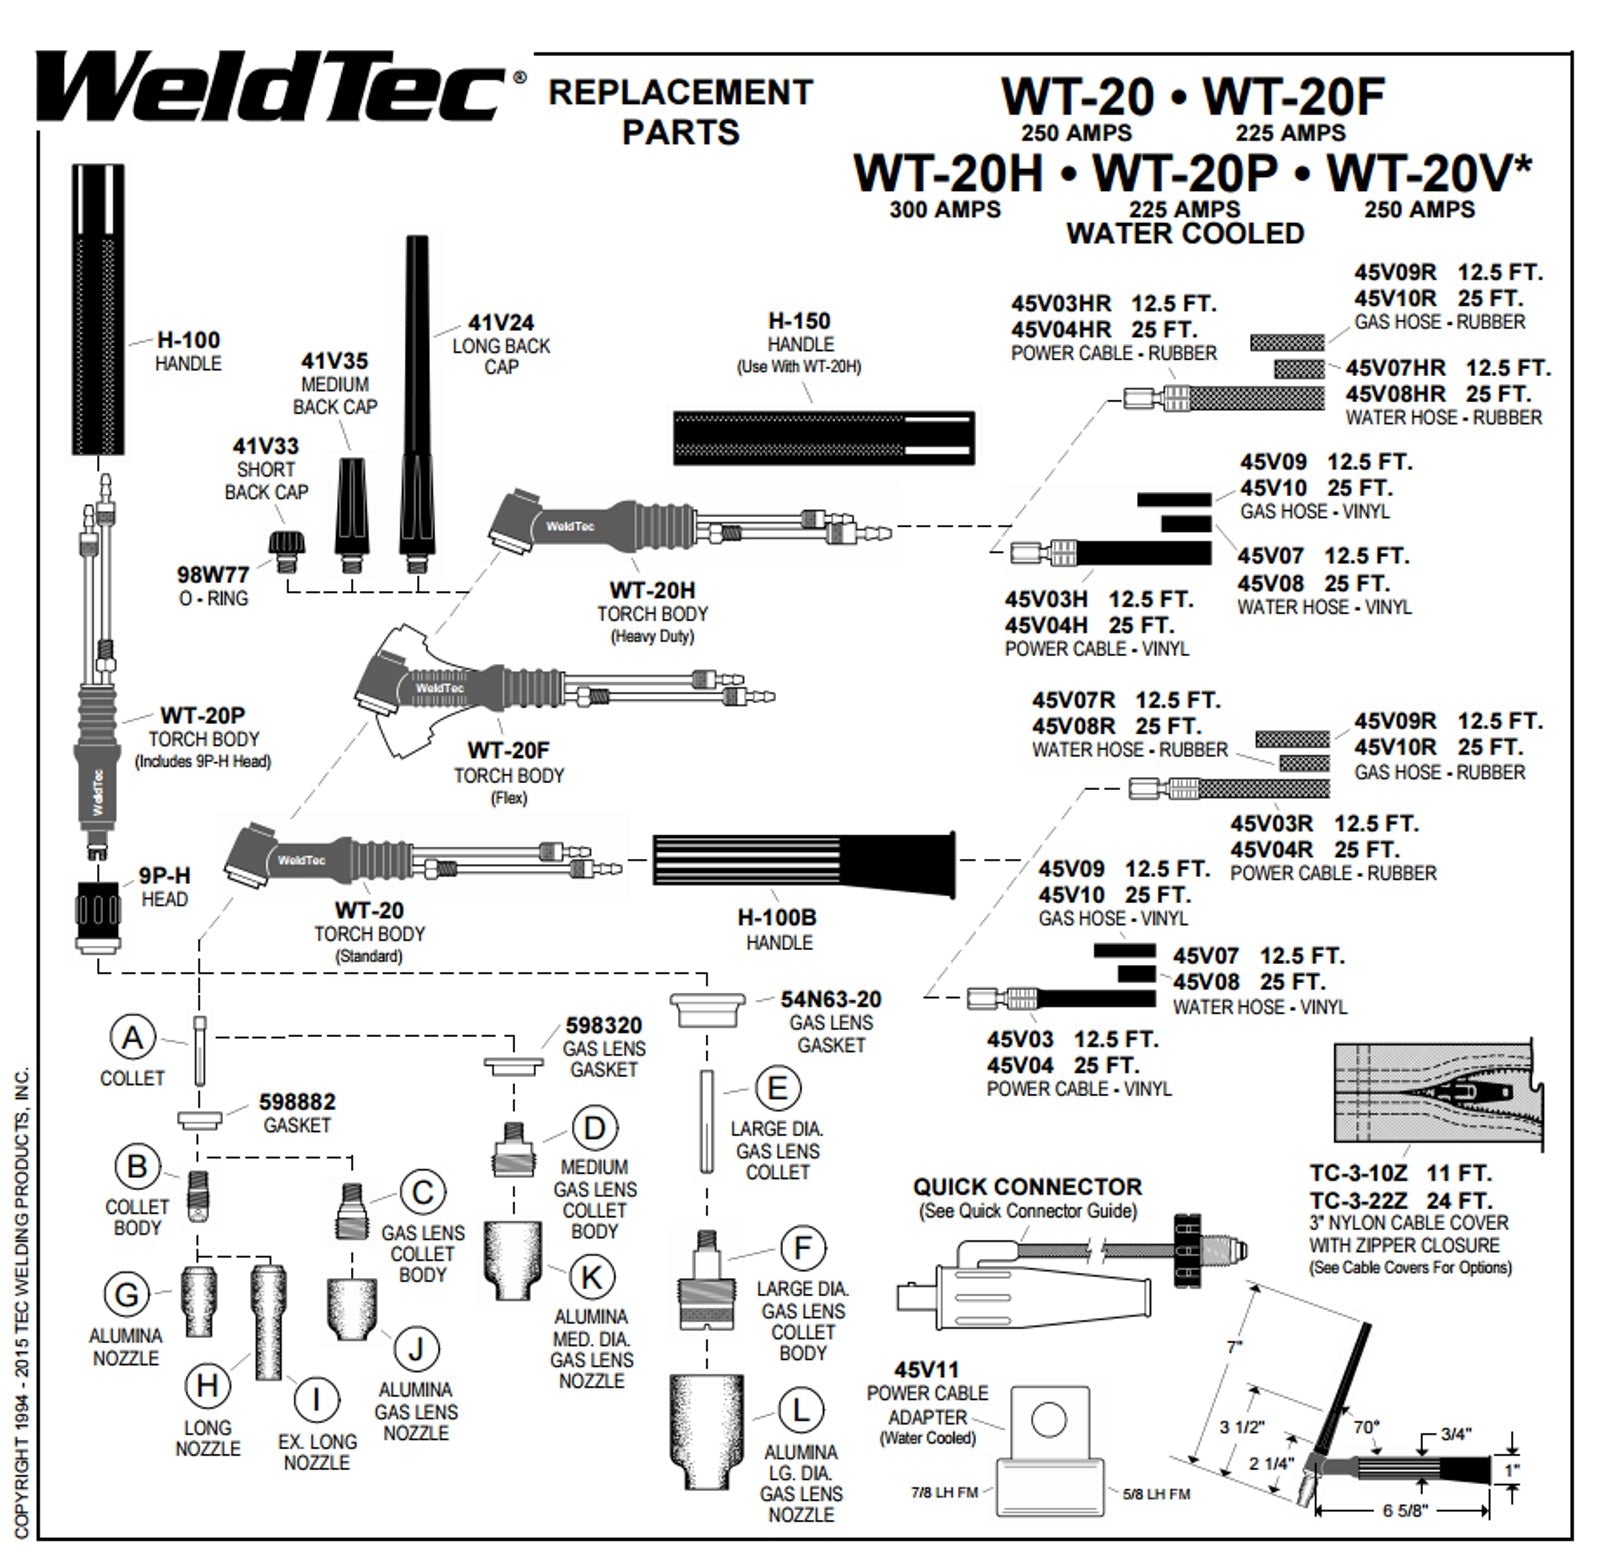 Weldtec Amp Water Cooled TIG Torch 12' (WT-20-12)